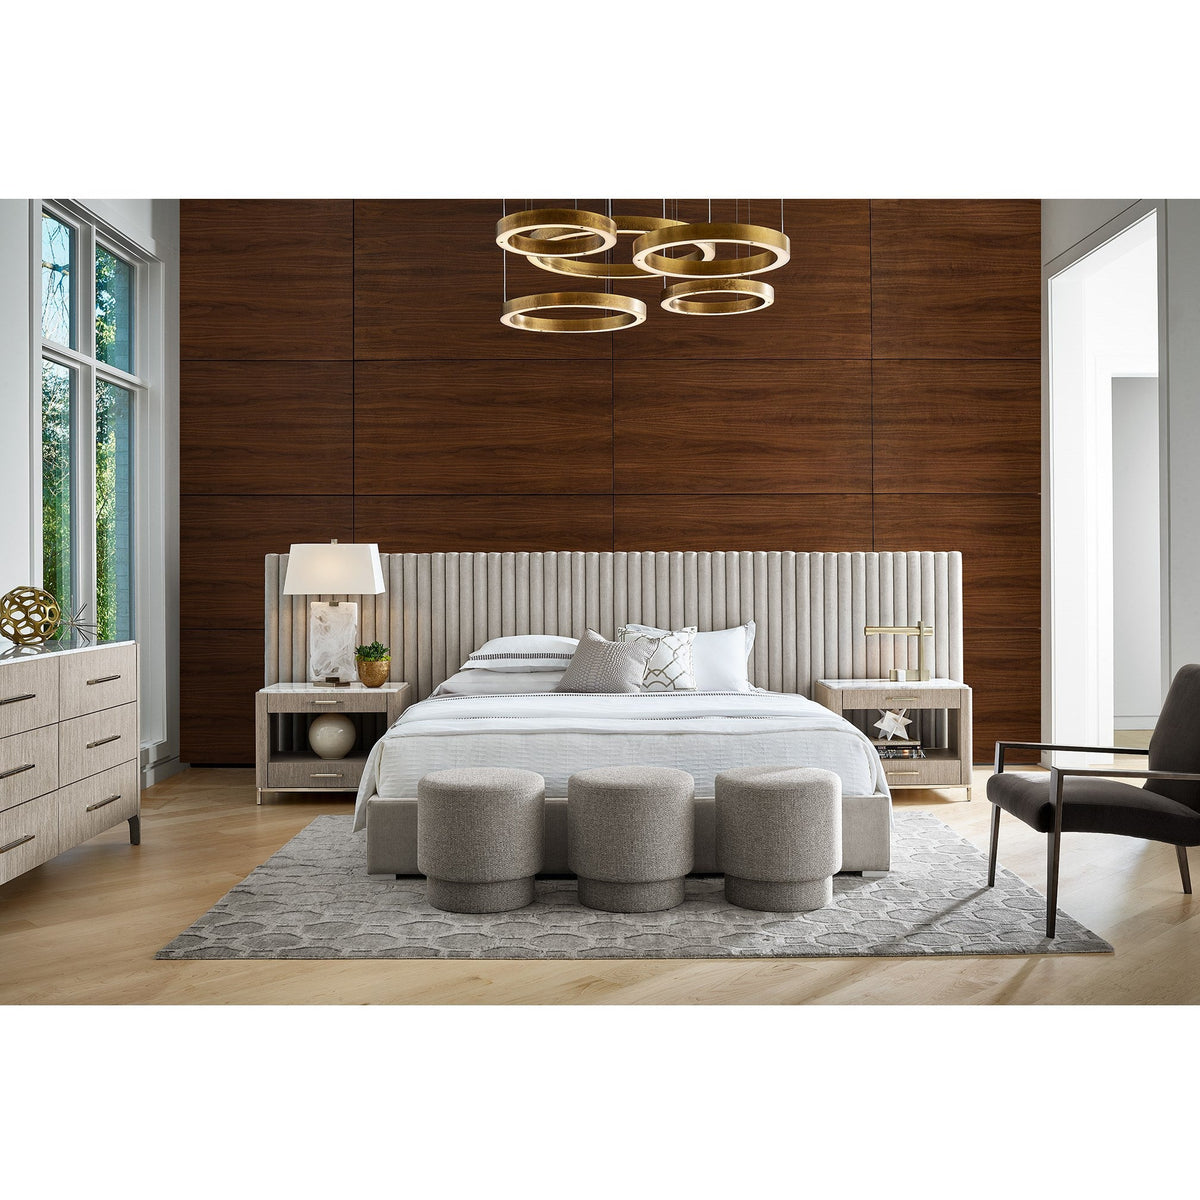 Decker Wall Bed With Panels - Be Bold Furniture